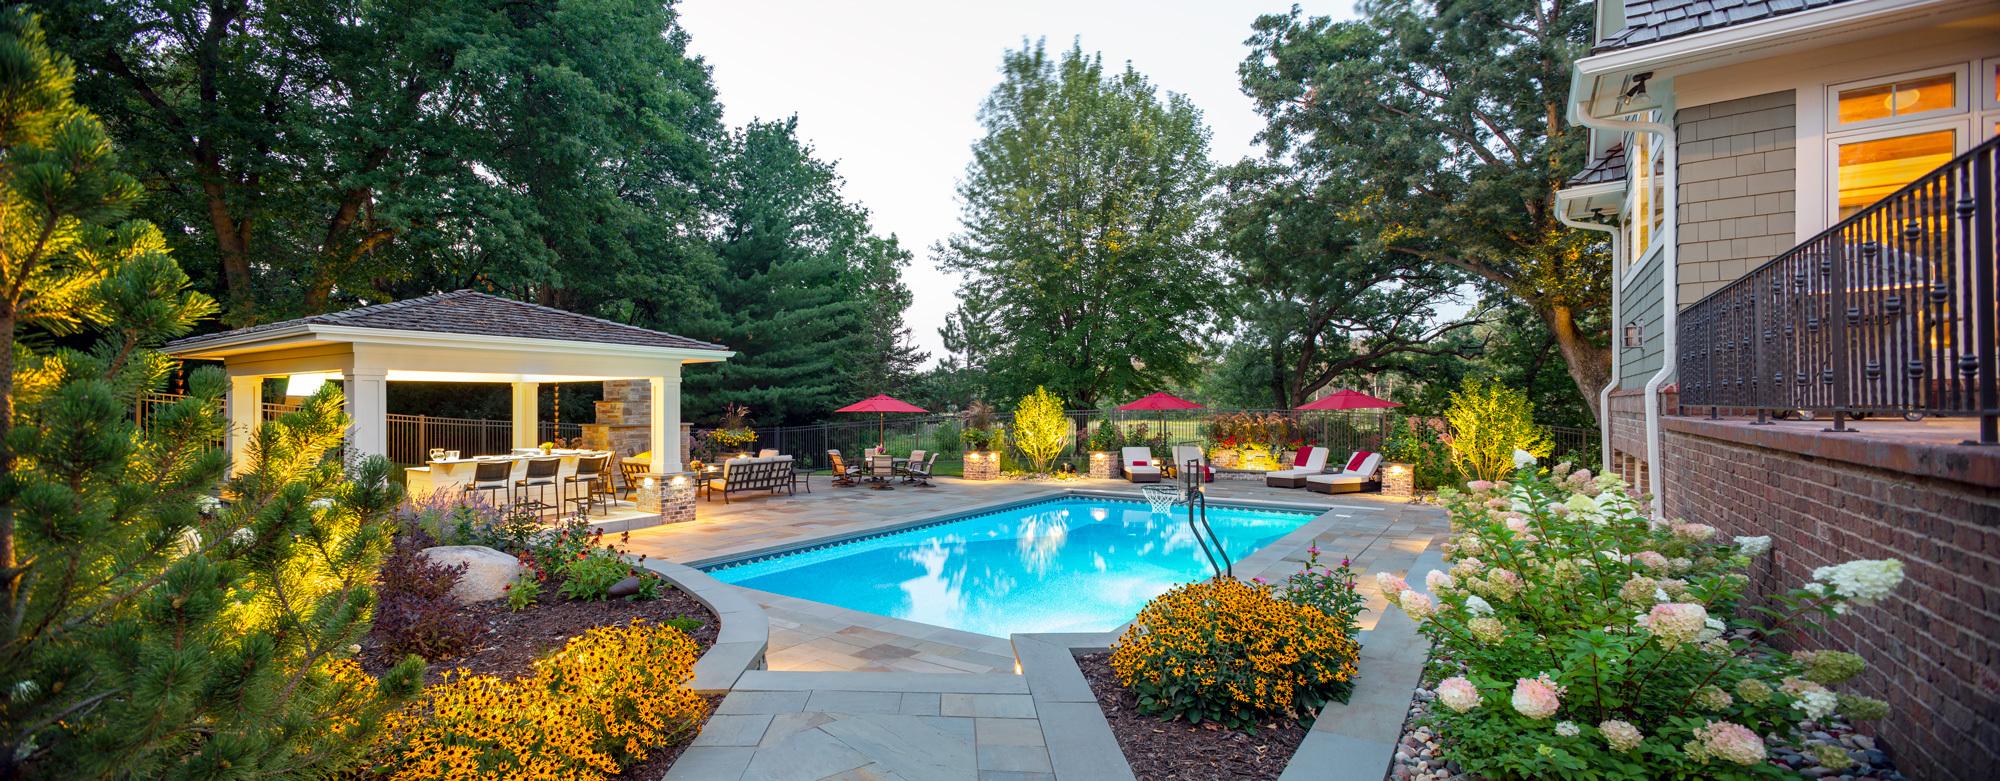 swimming pool landscape with perennial gardens in North Oaks MN